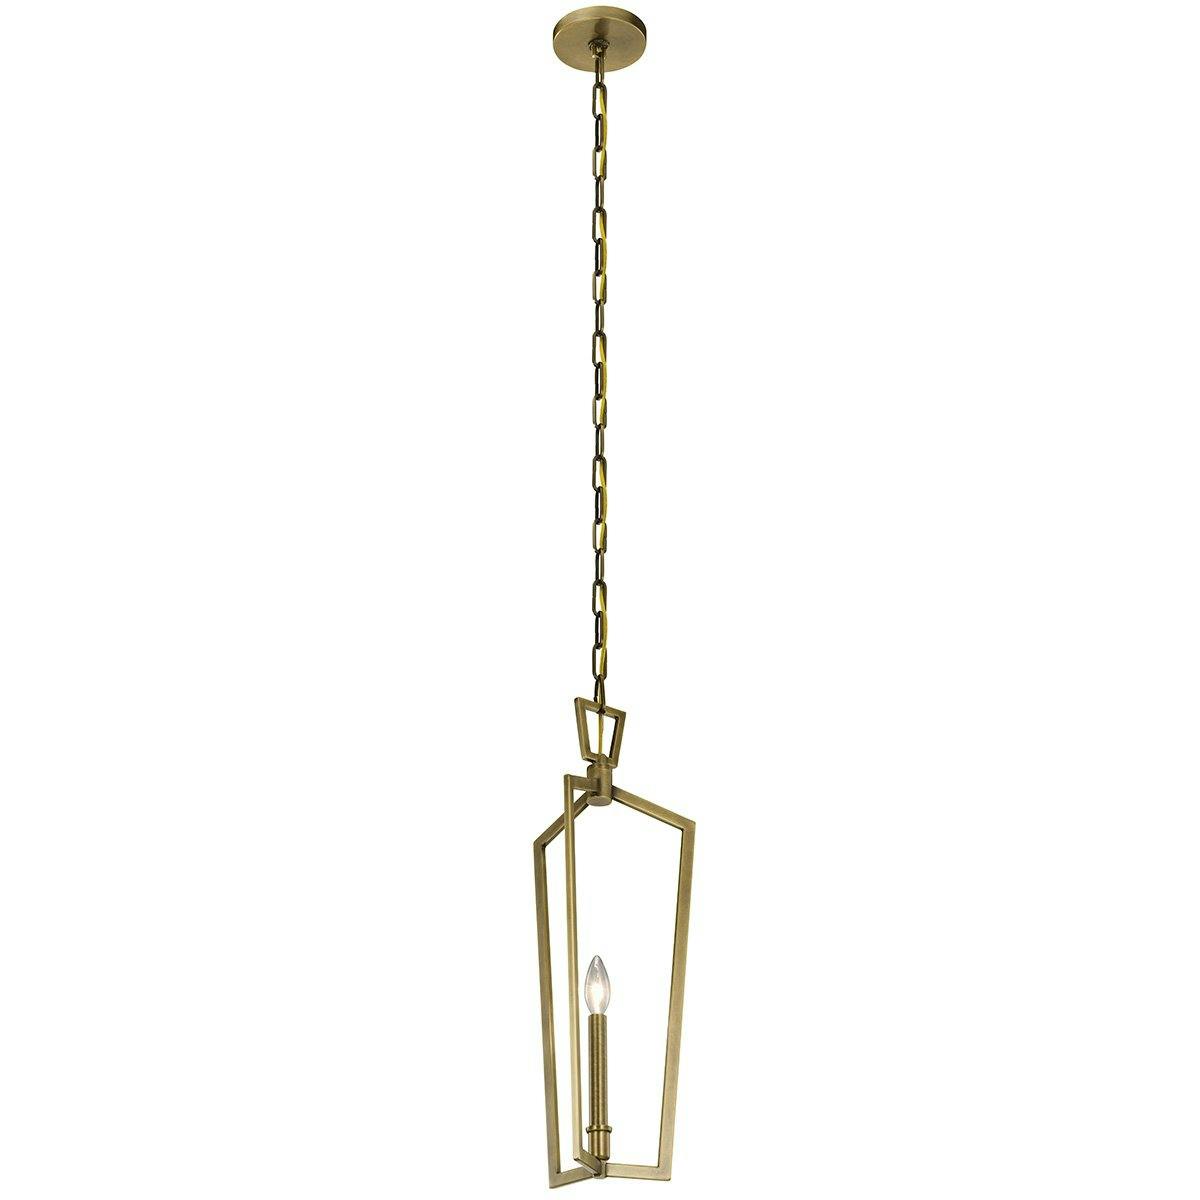 Abbotswell 23.5" Mini Pendant Brass on a white background